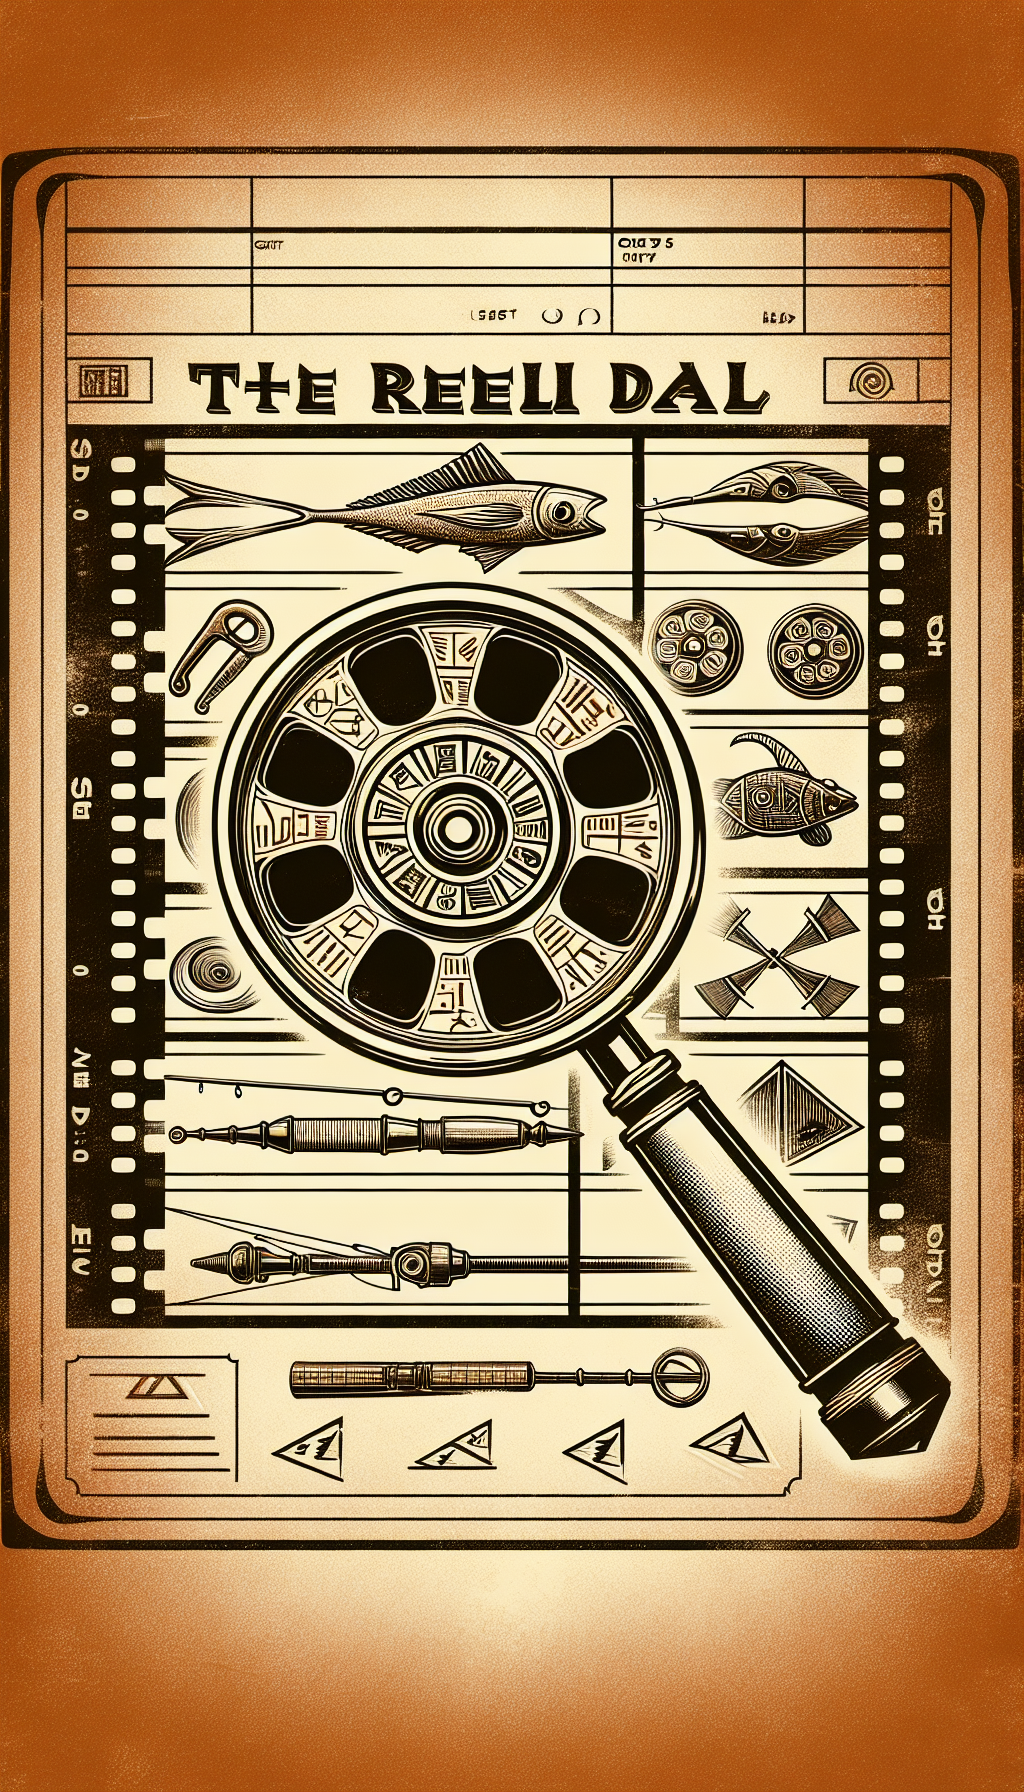 An eclectic montage features a magnifying glass poised over an ancient, engraved fishing rod, with deciphered hieroglyph-like symbols floating upwards, transitioning into a film reel where each frame showcases a different hallmark of vintage rod makers. Etched beneath in sepia tones, the words "The Reel Deal" anchor the image in a classic typewriter font, evoking a sense of historic detective work.